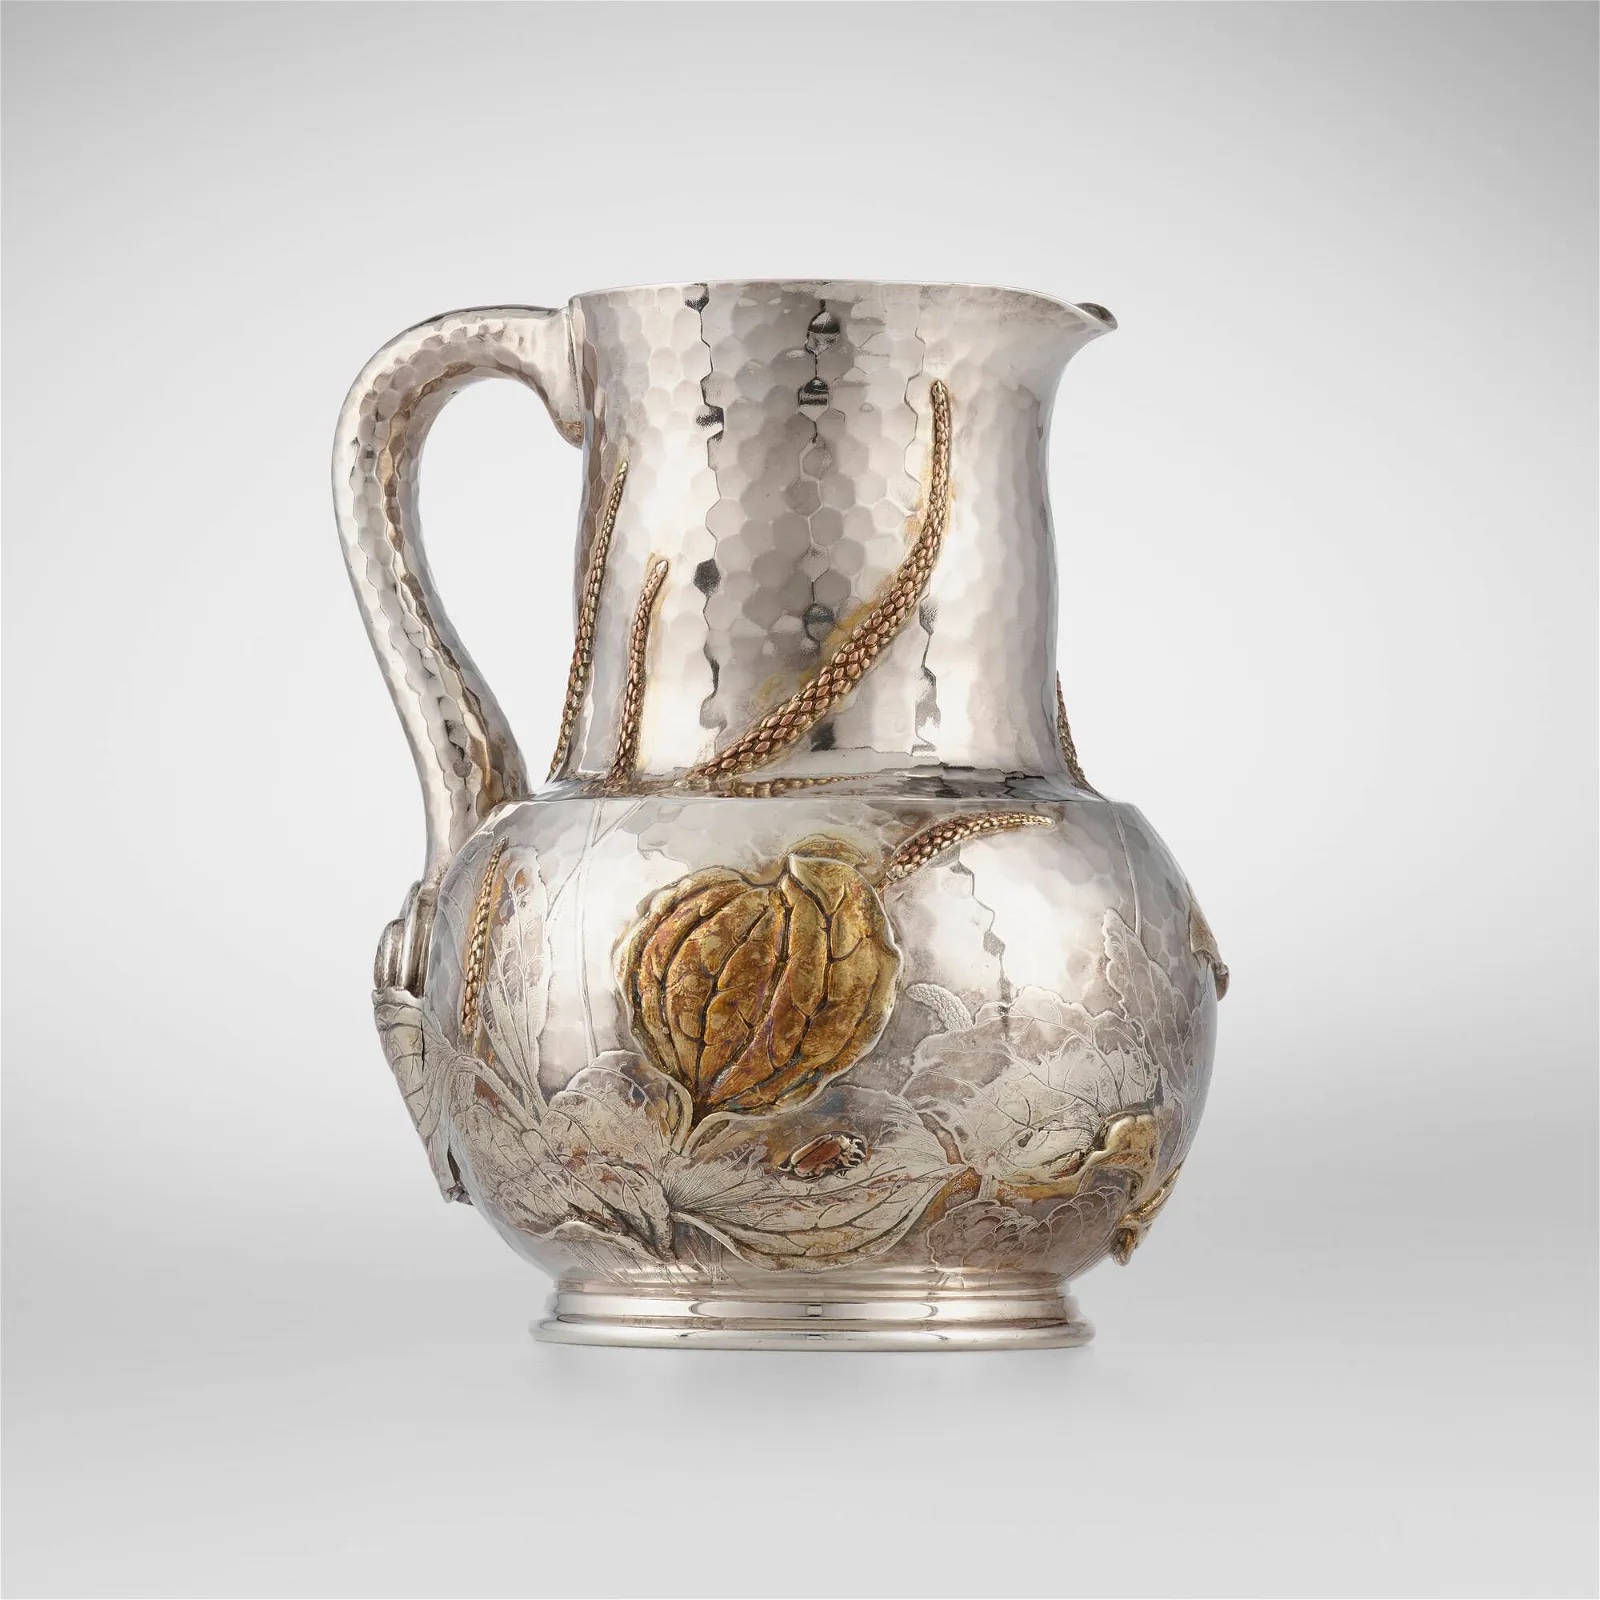 Circa-1885 Tiffany & Co. Aesthetic Movement pitcher, which hammered for $32,000 and sold for $41,920 with buyer’s premium at Toomey & Co.